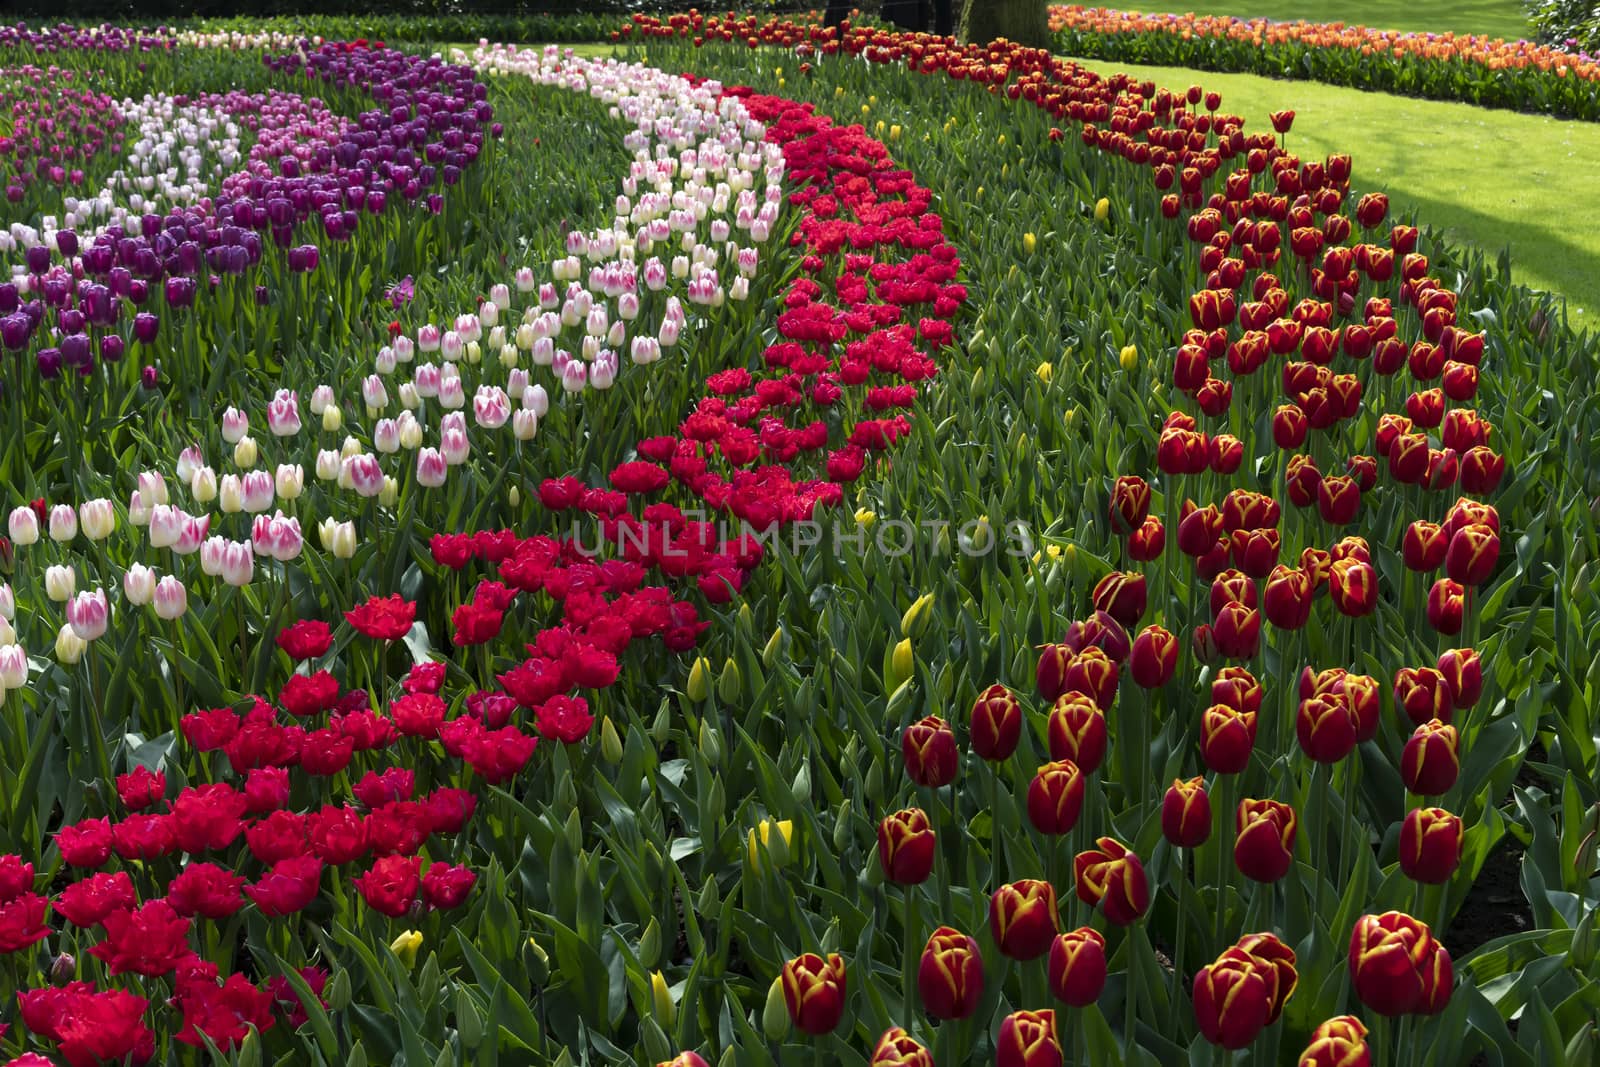 Pure red and pink white color tulips blossom blooming under a very well maintained garden in spring time by ankorlight